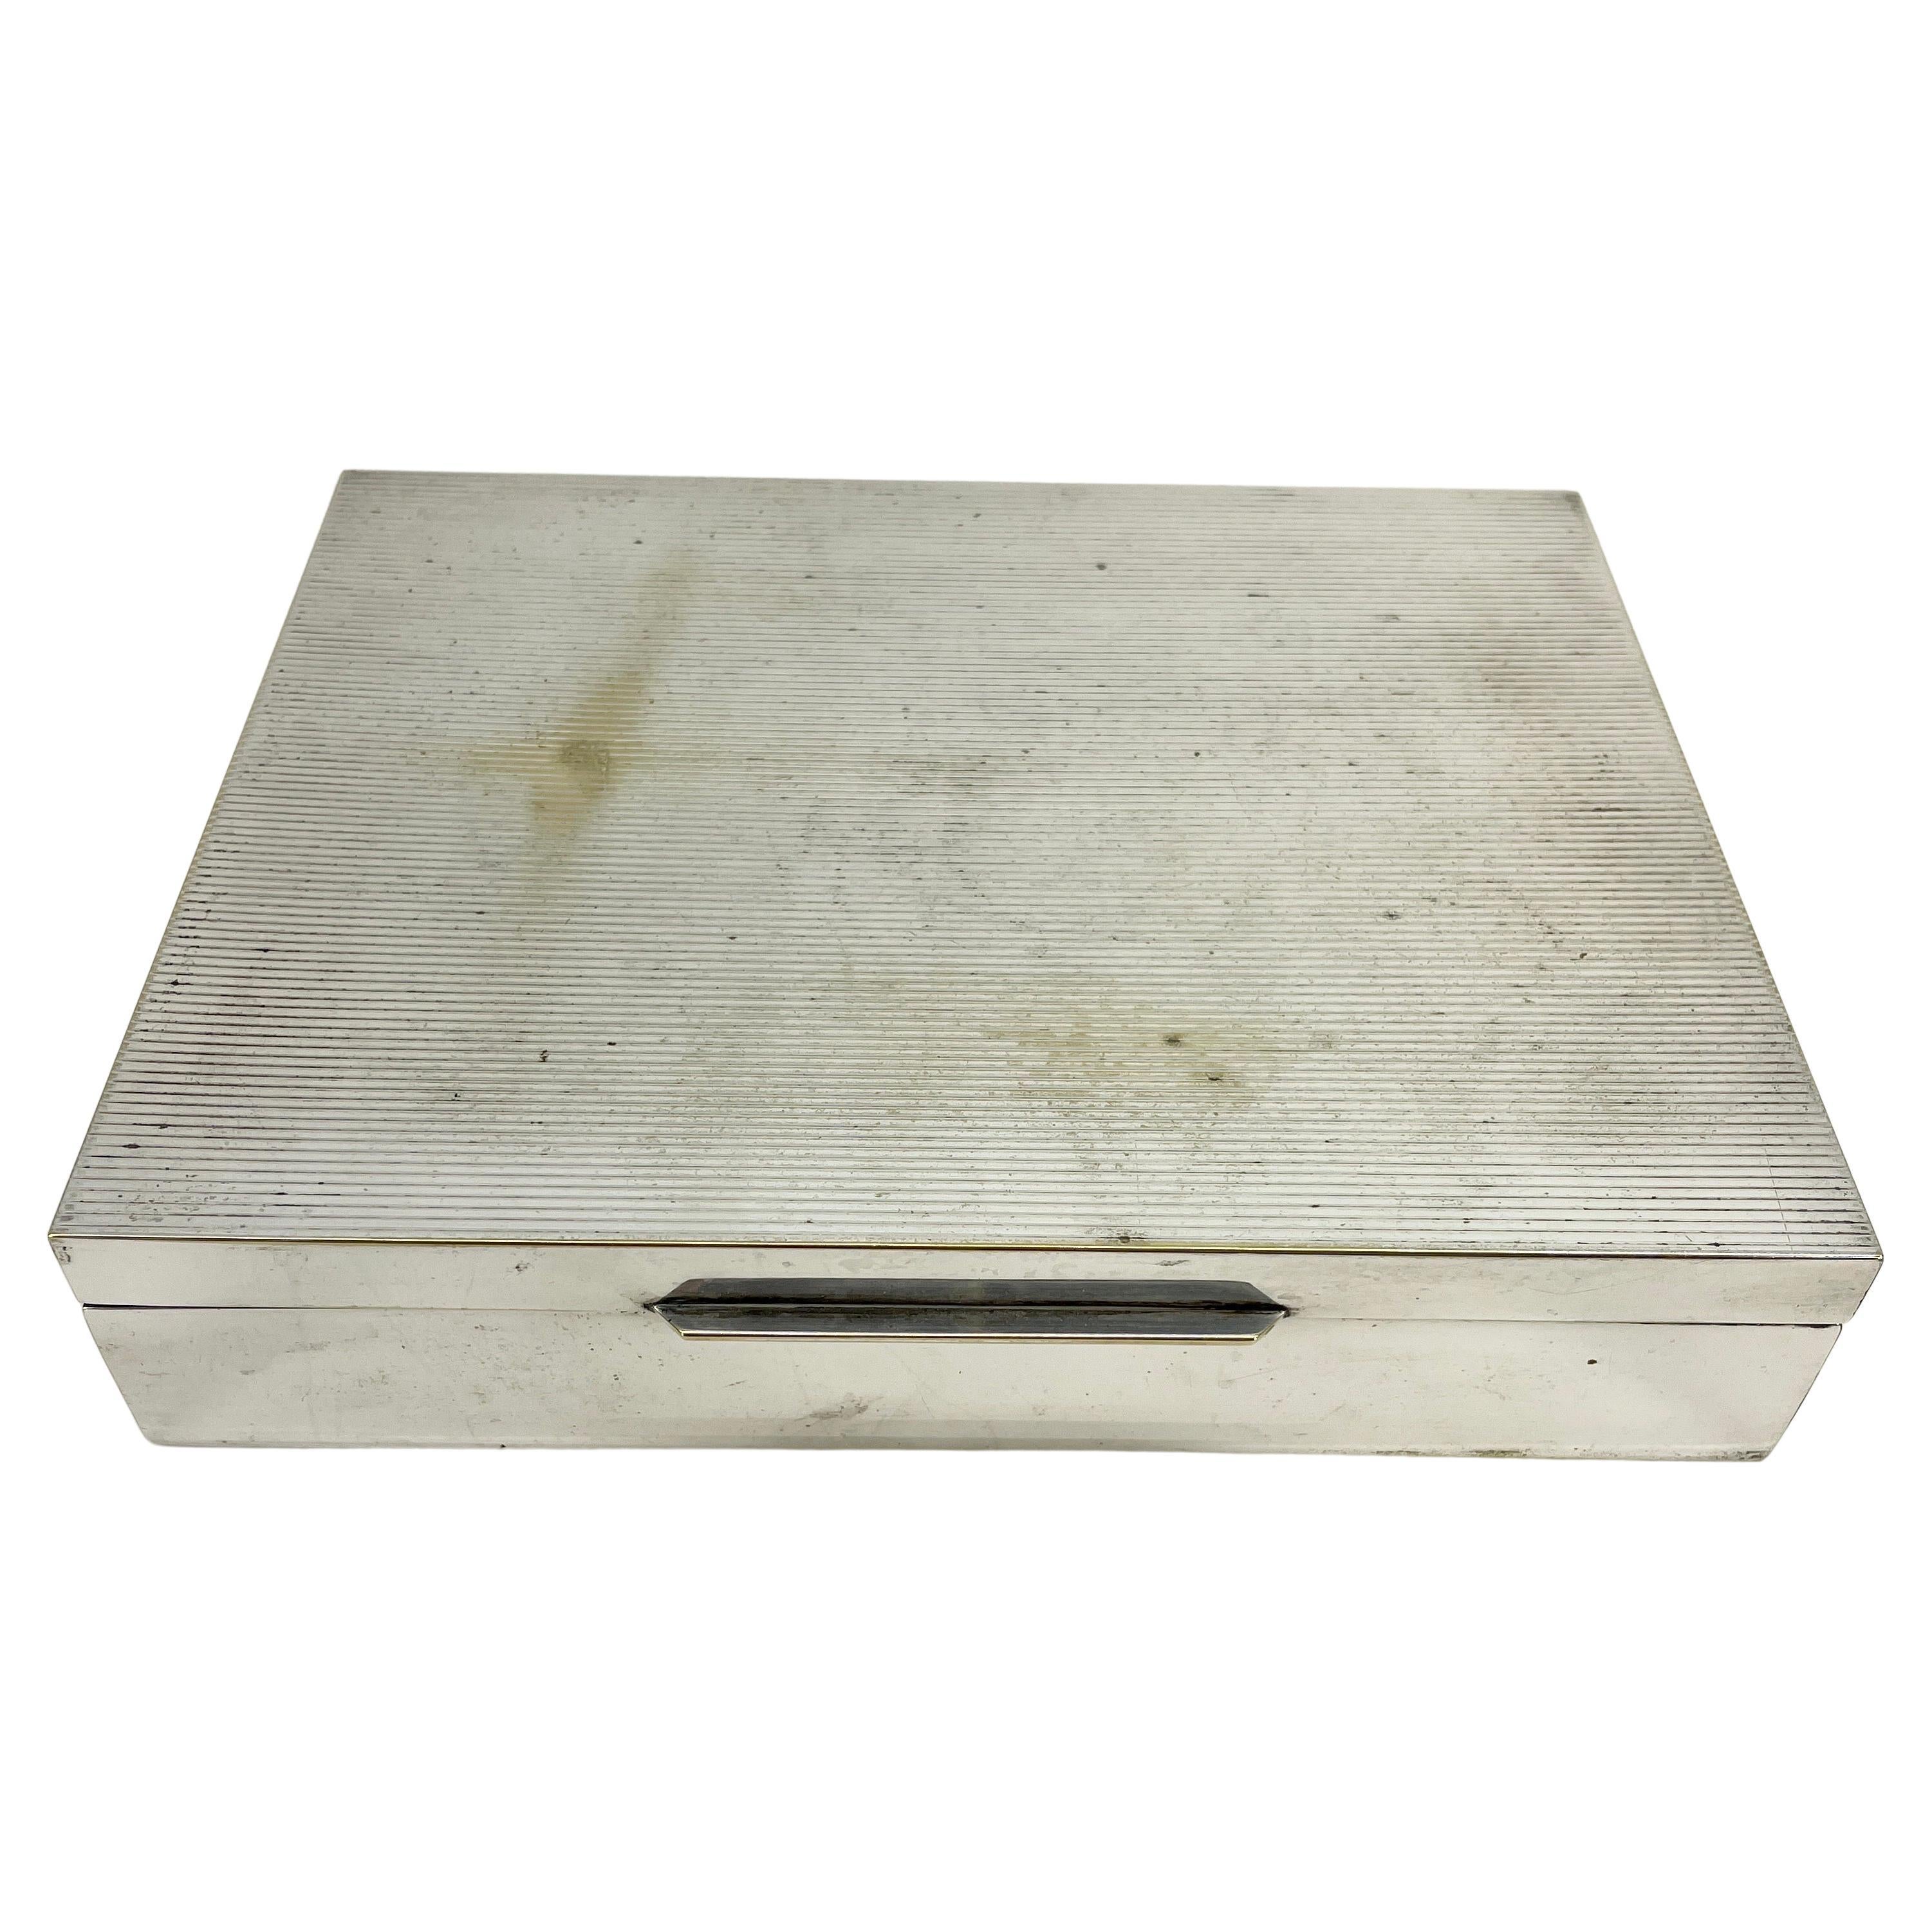 Large Classic Italian Cigar Box in Thick Silver Plate With Striking Stripped Decor on the Top and Fitted with the Original Cedar Wood Lining. Marked made in Italy.


